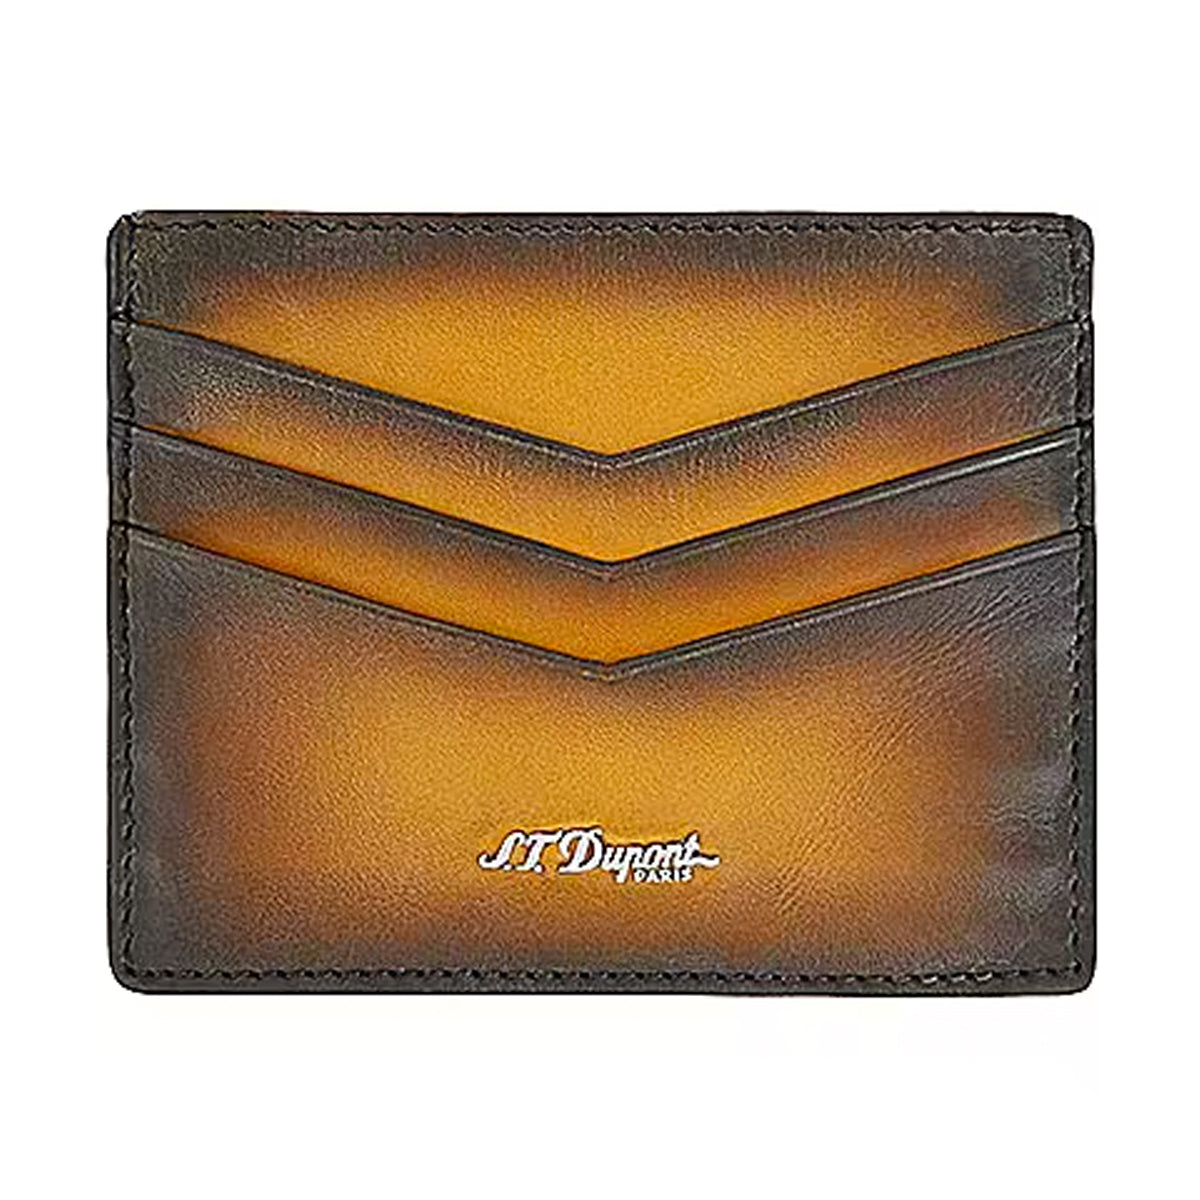 S.T. Dupont Grand Atelier Credit Card Holder